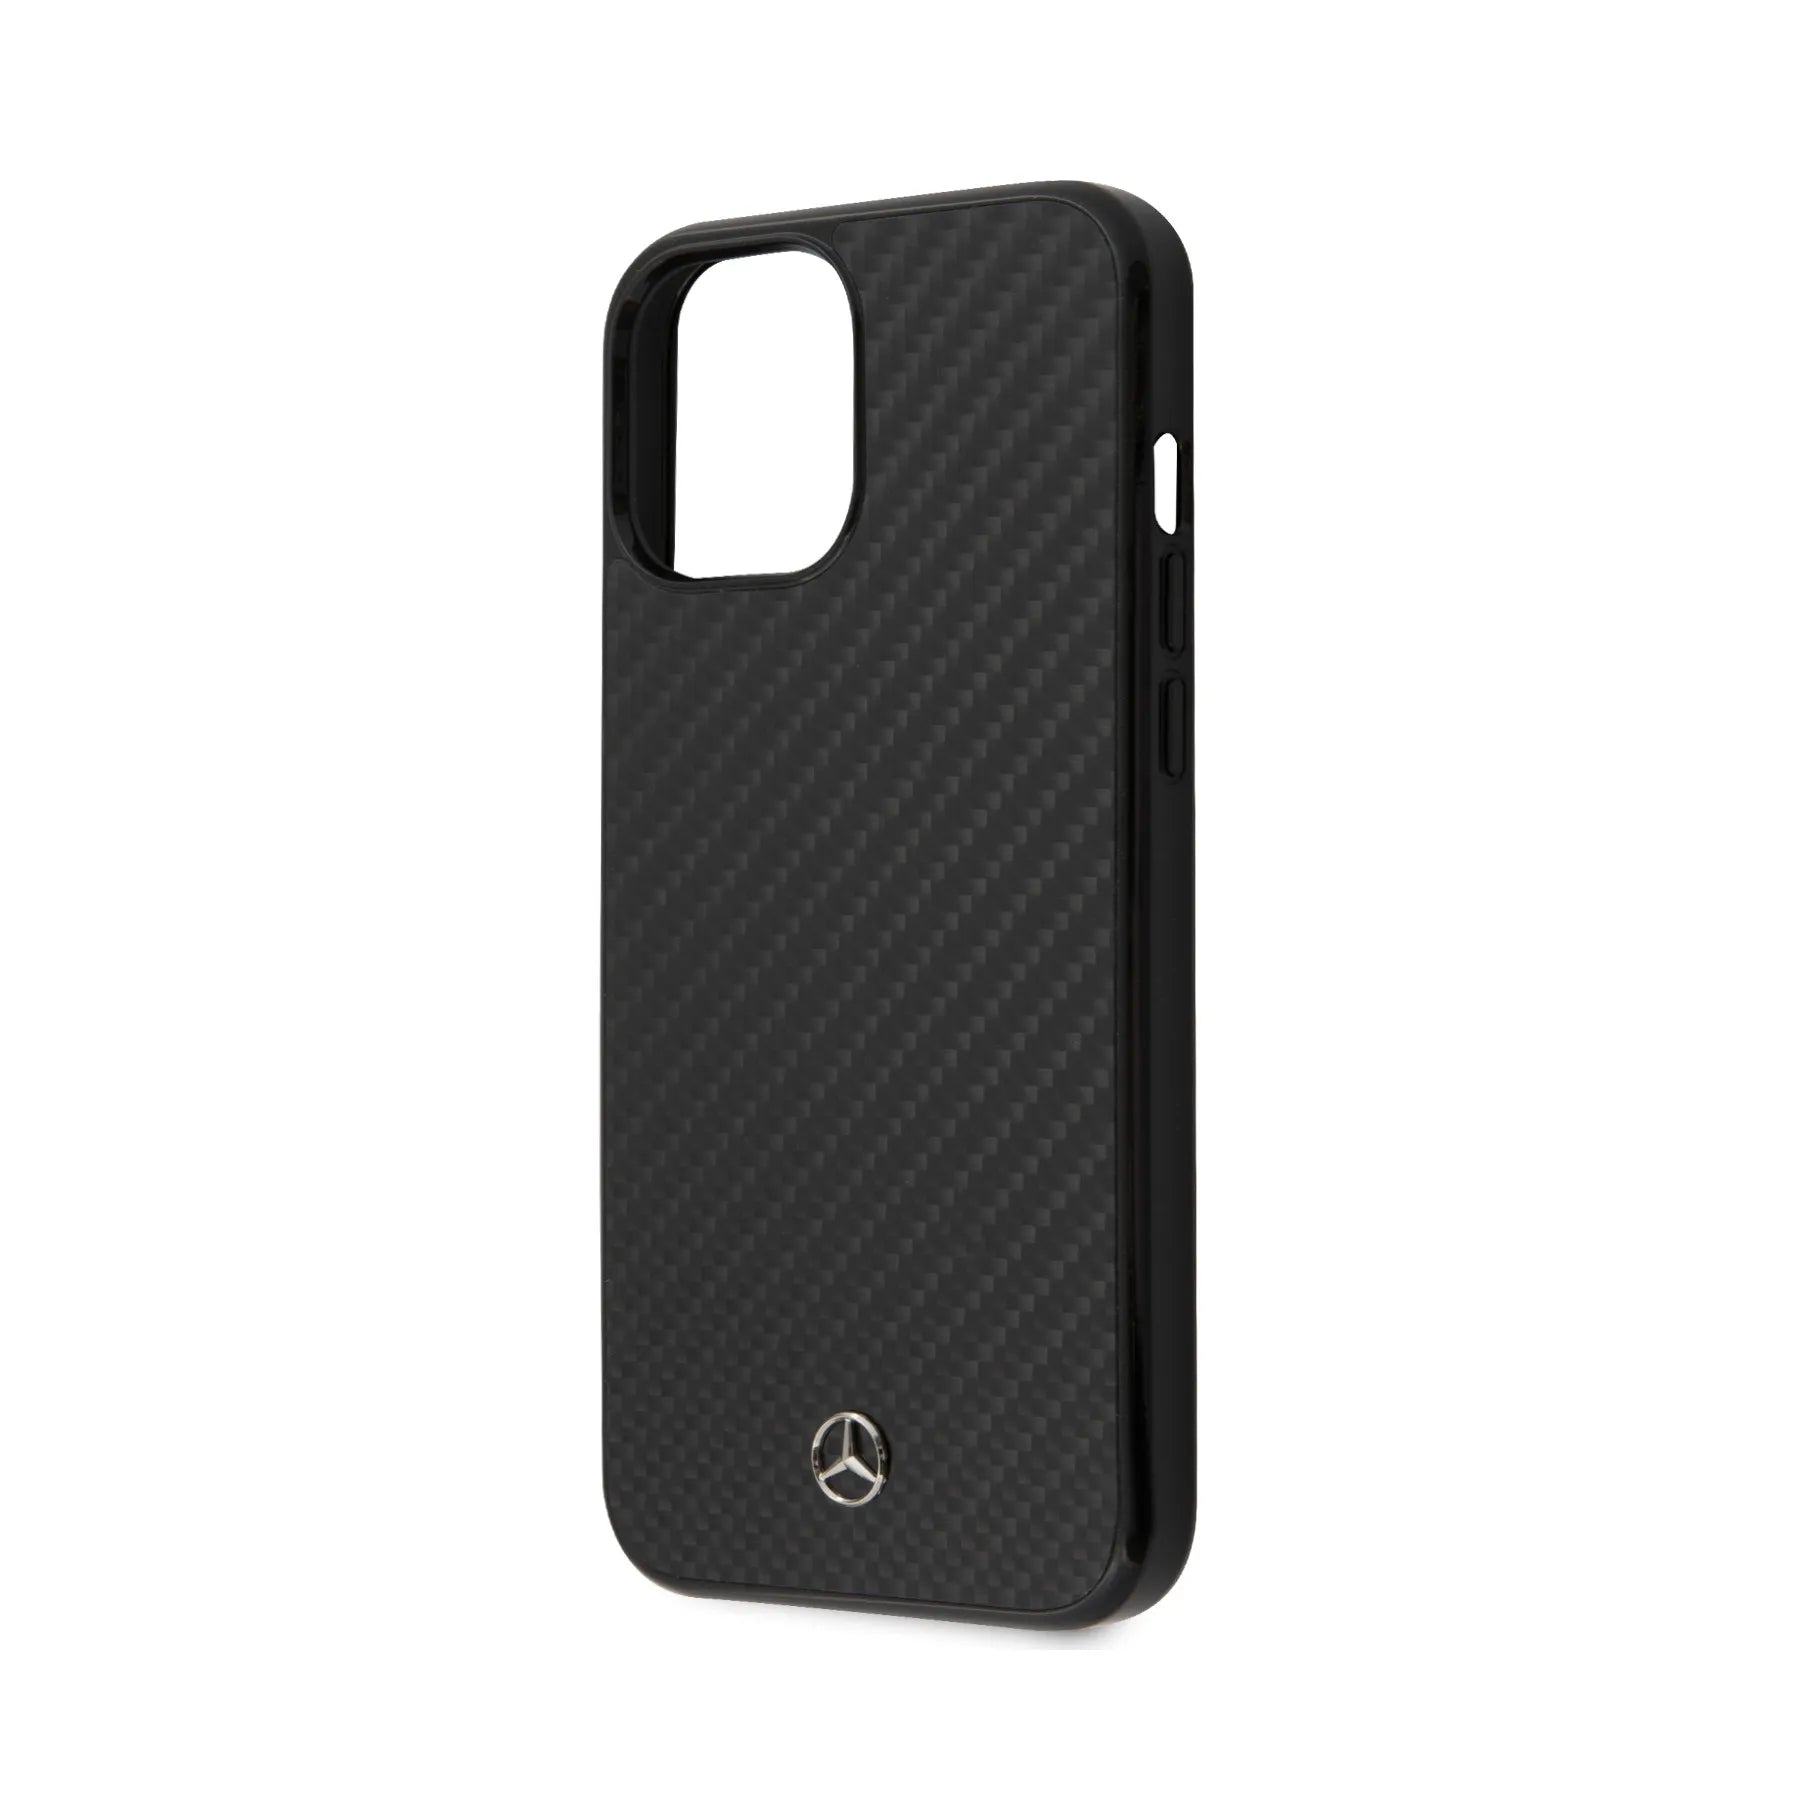 Coque Mercedes pour iPhone 12 Pro Max - My Store